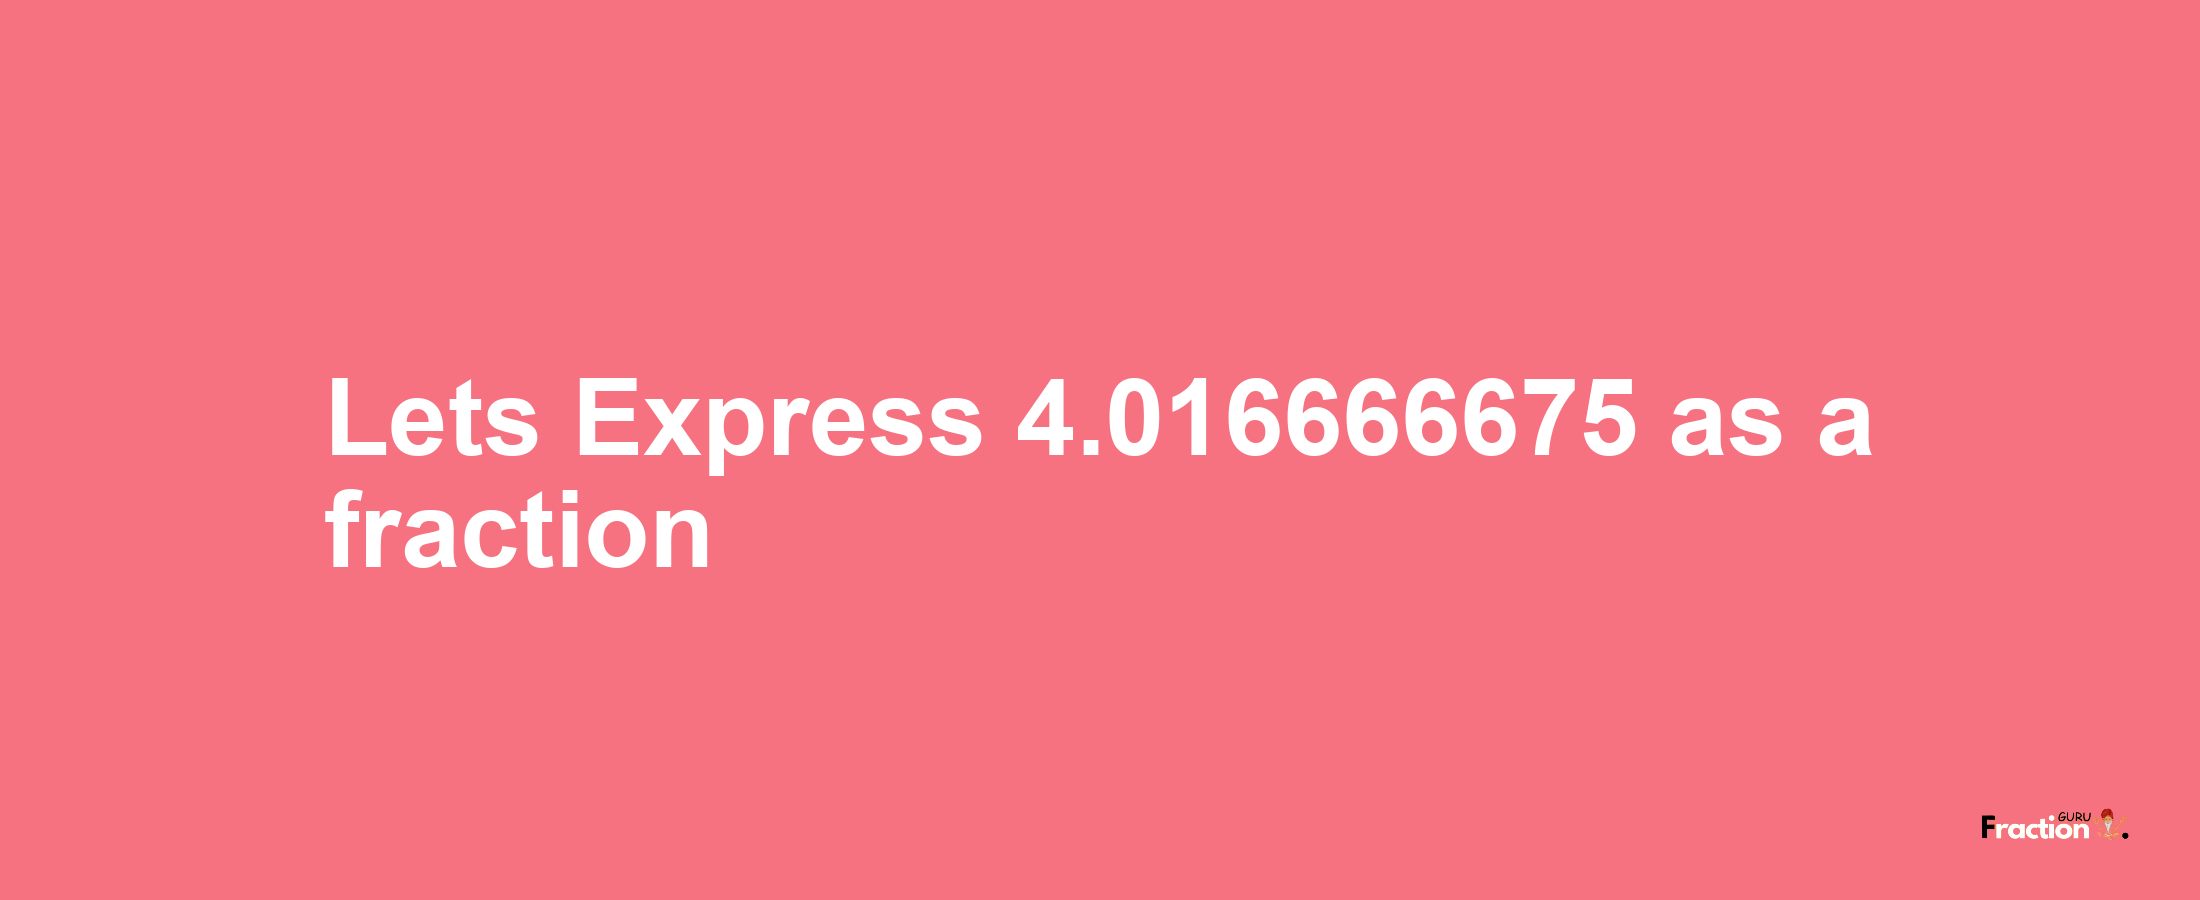 Lets Express 4.016666675 as afraction